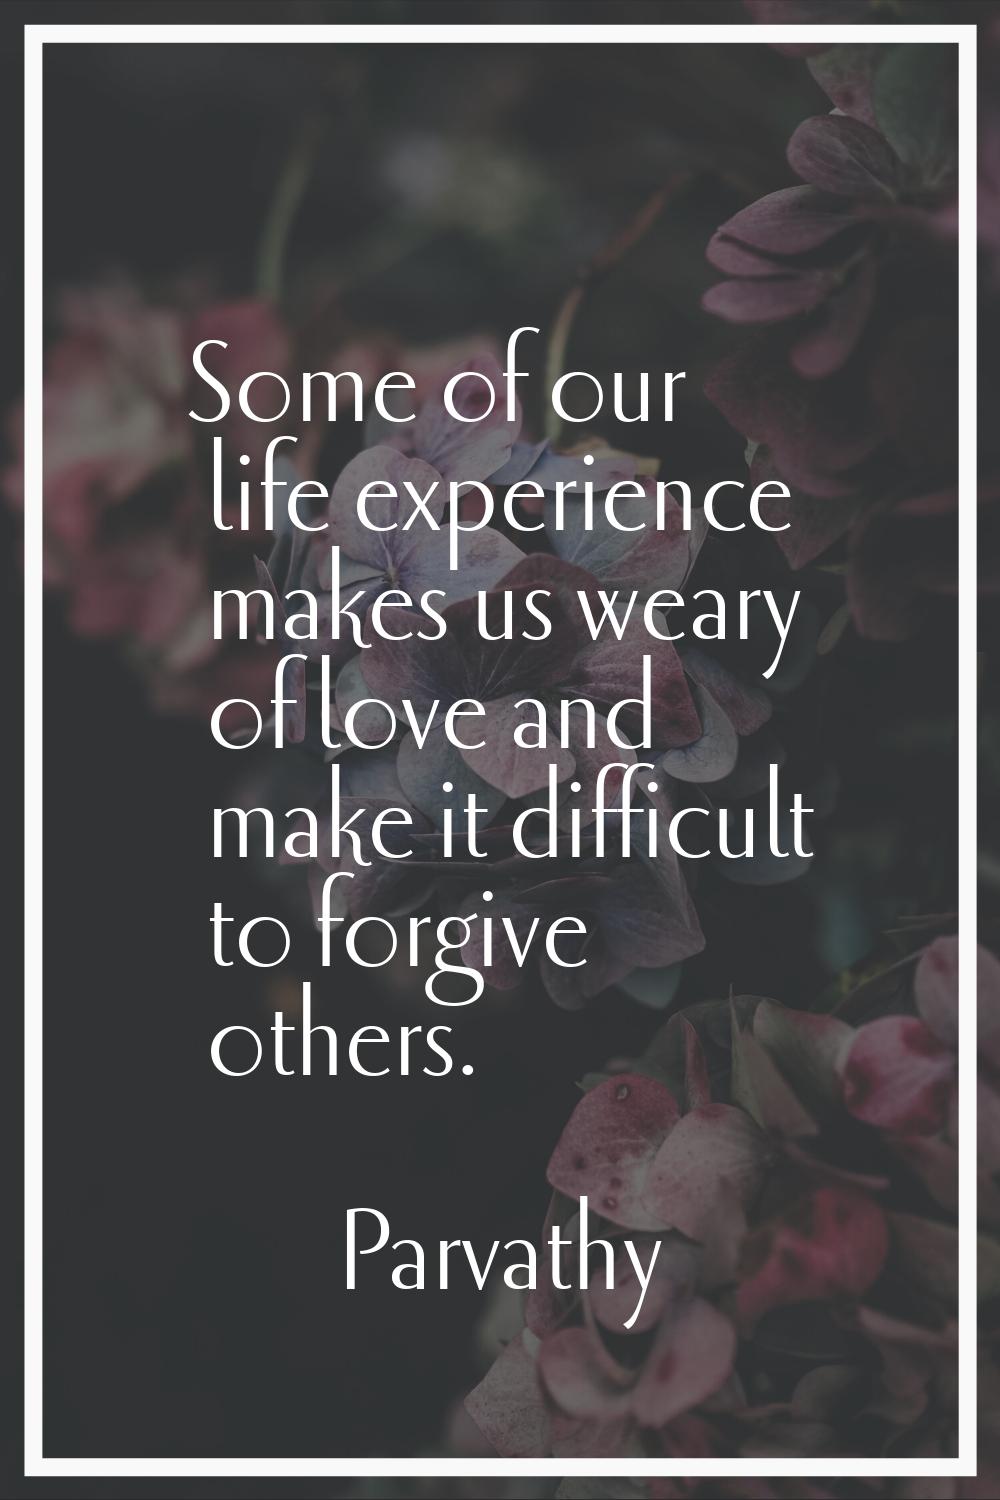 Some of our life experience makes us weary of love and make it difficult to forgive others.